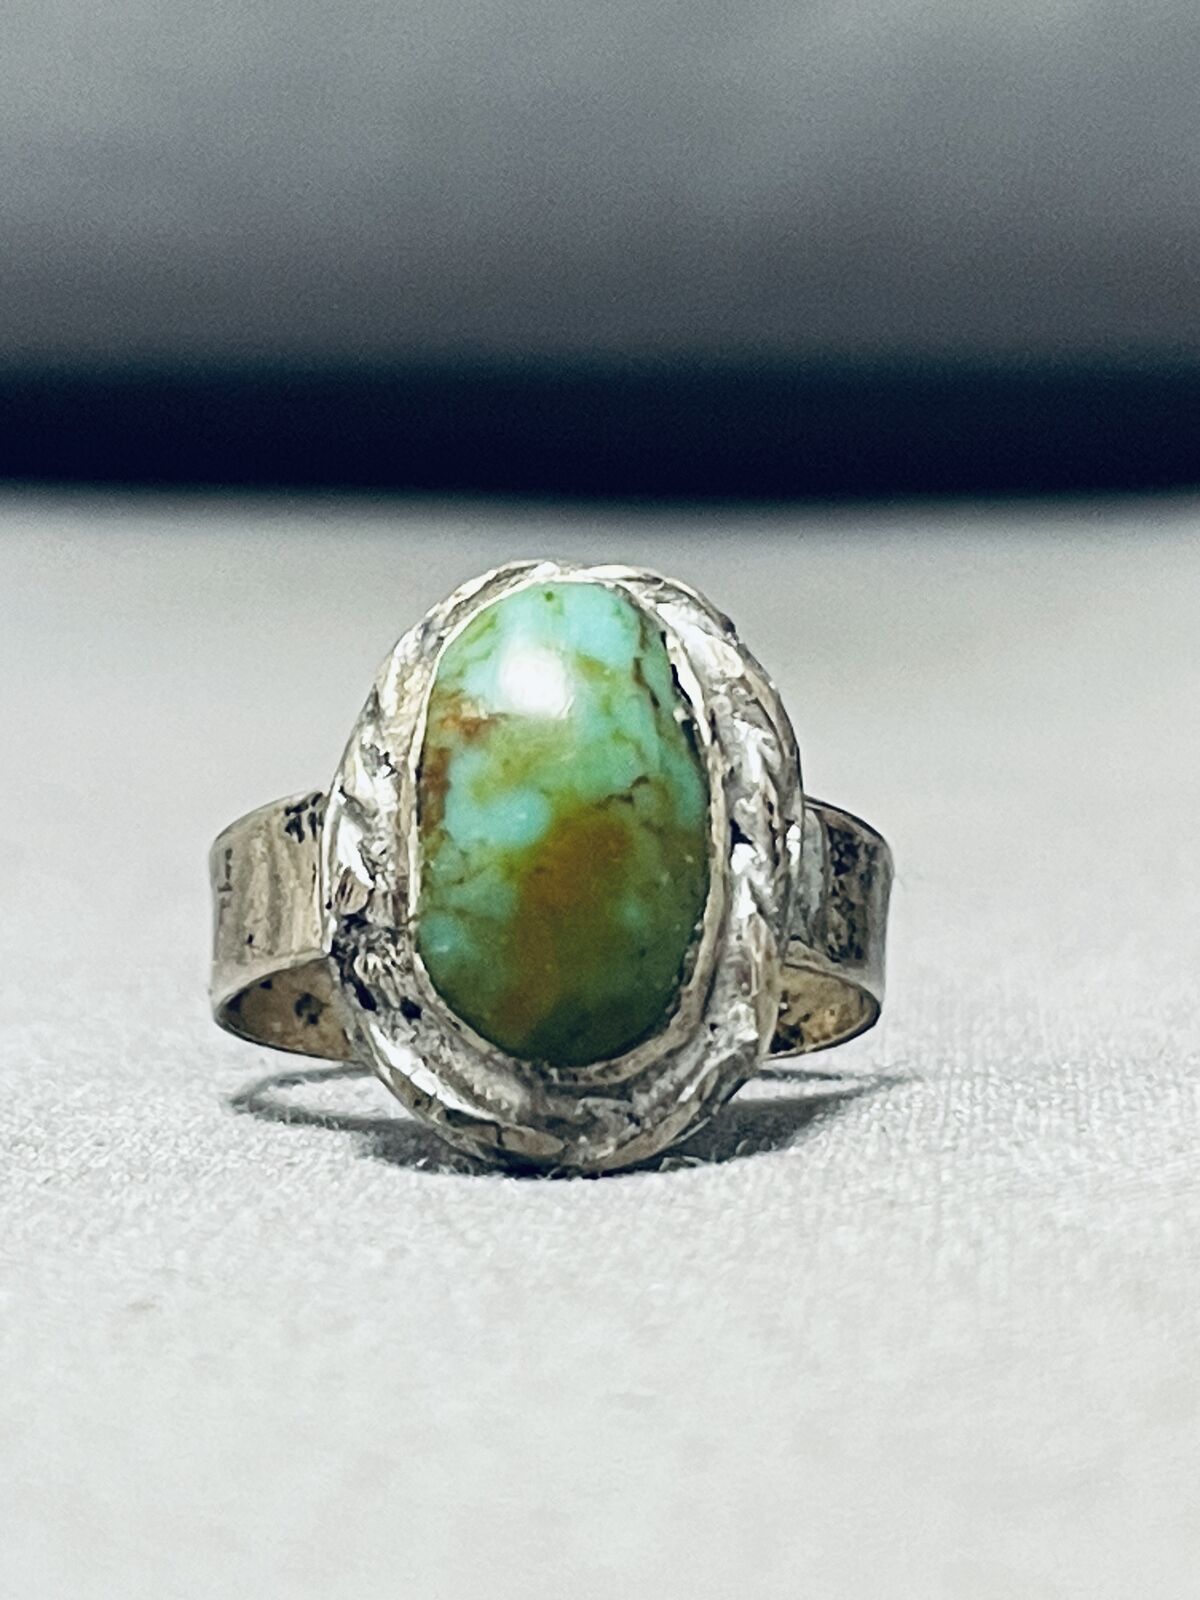 FAB VINTAGE NAVAJO ROYSTON TURQUOISE STERLING SILVER RING